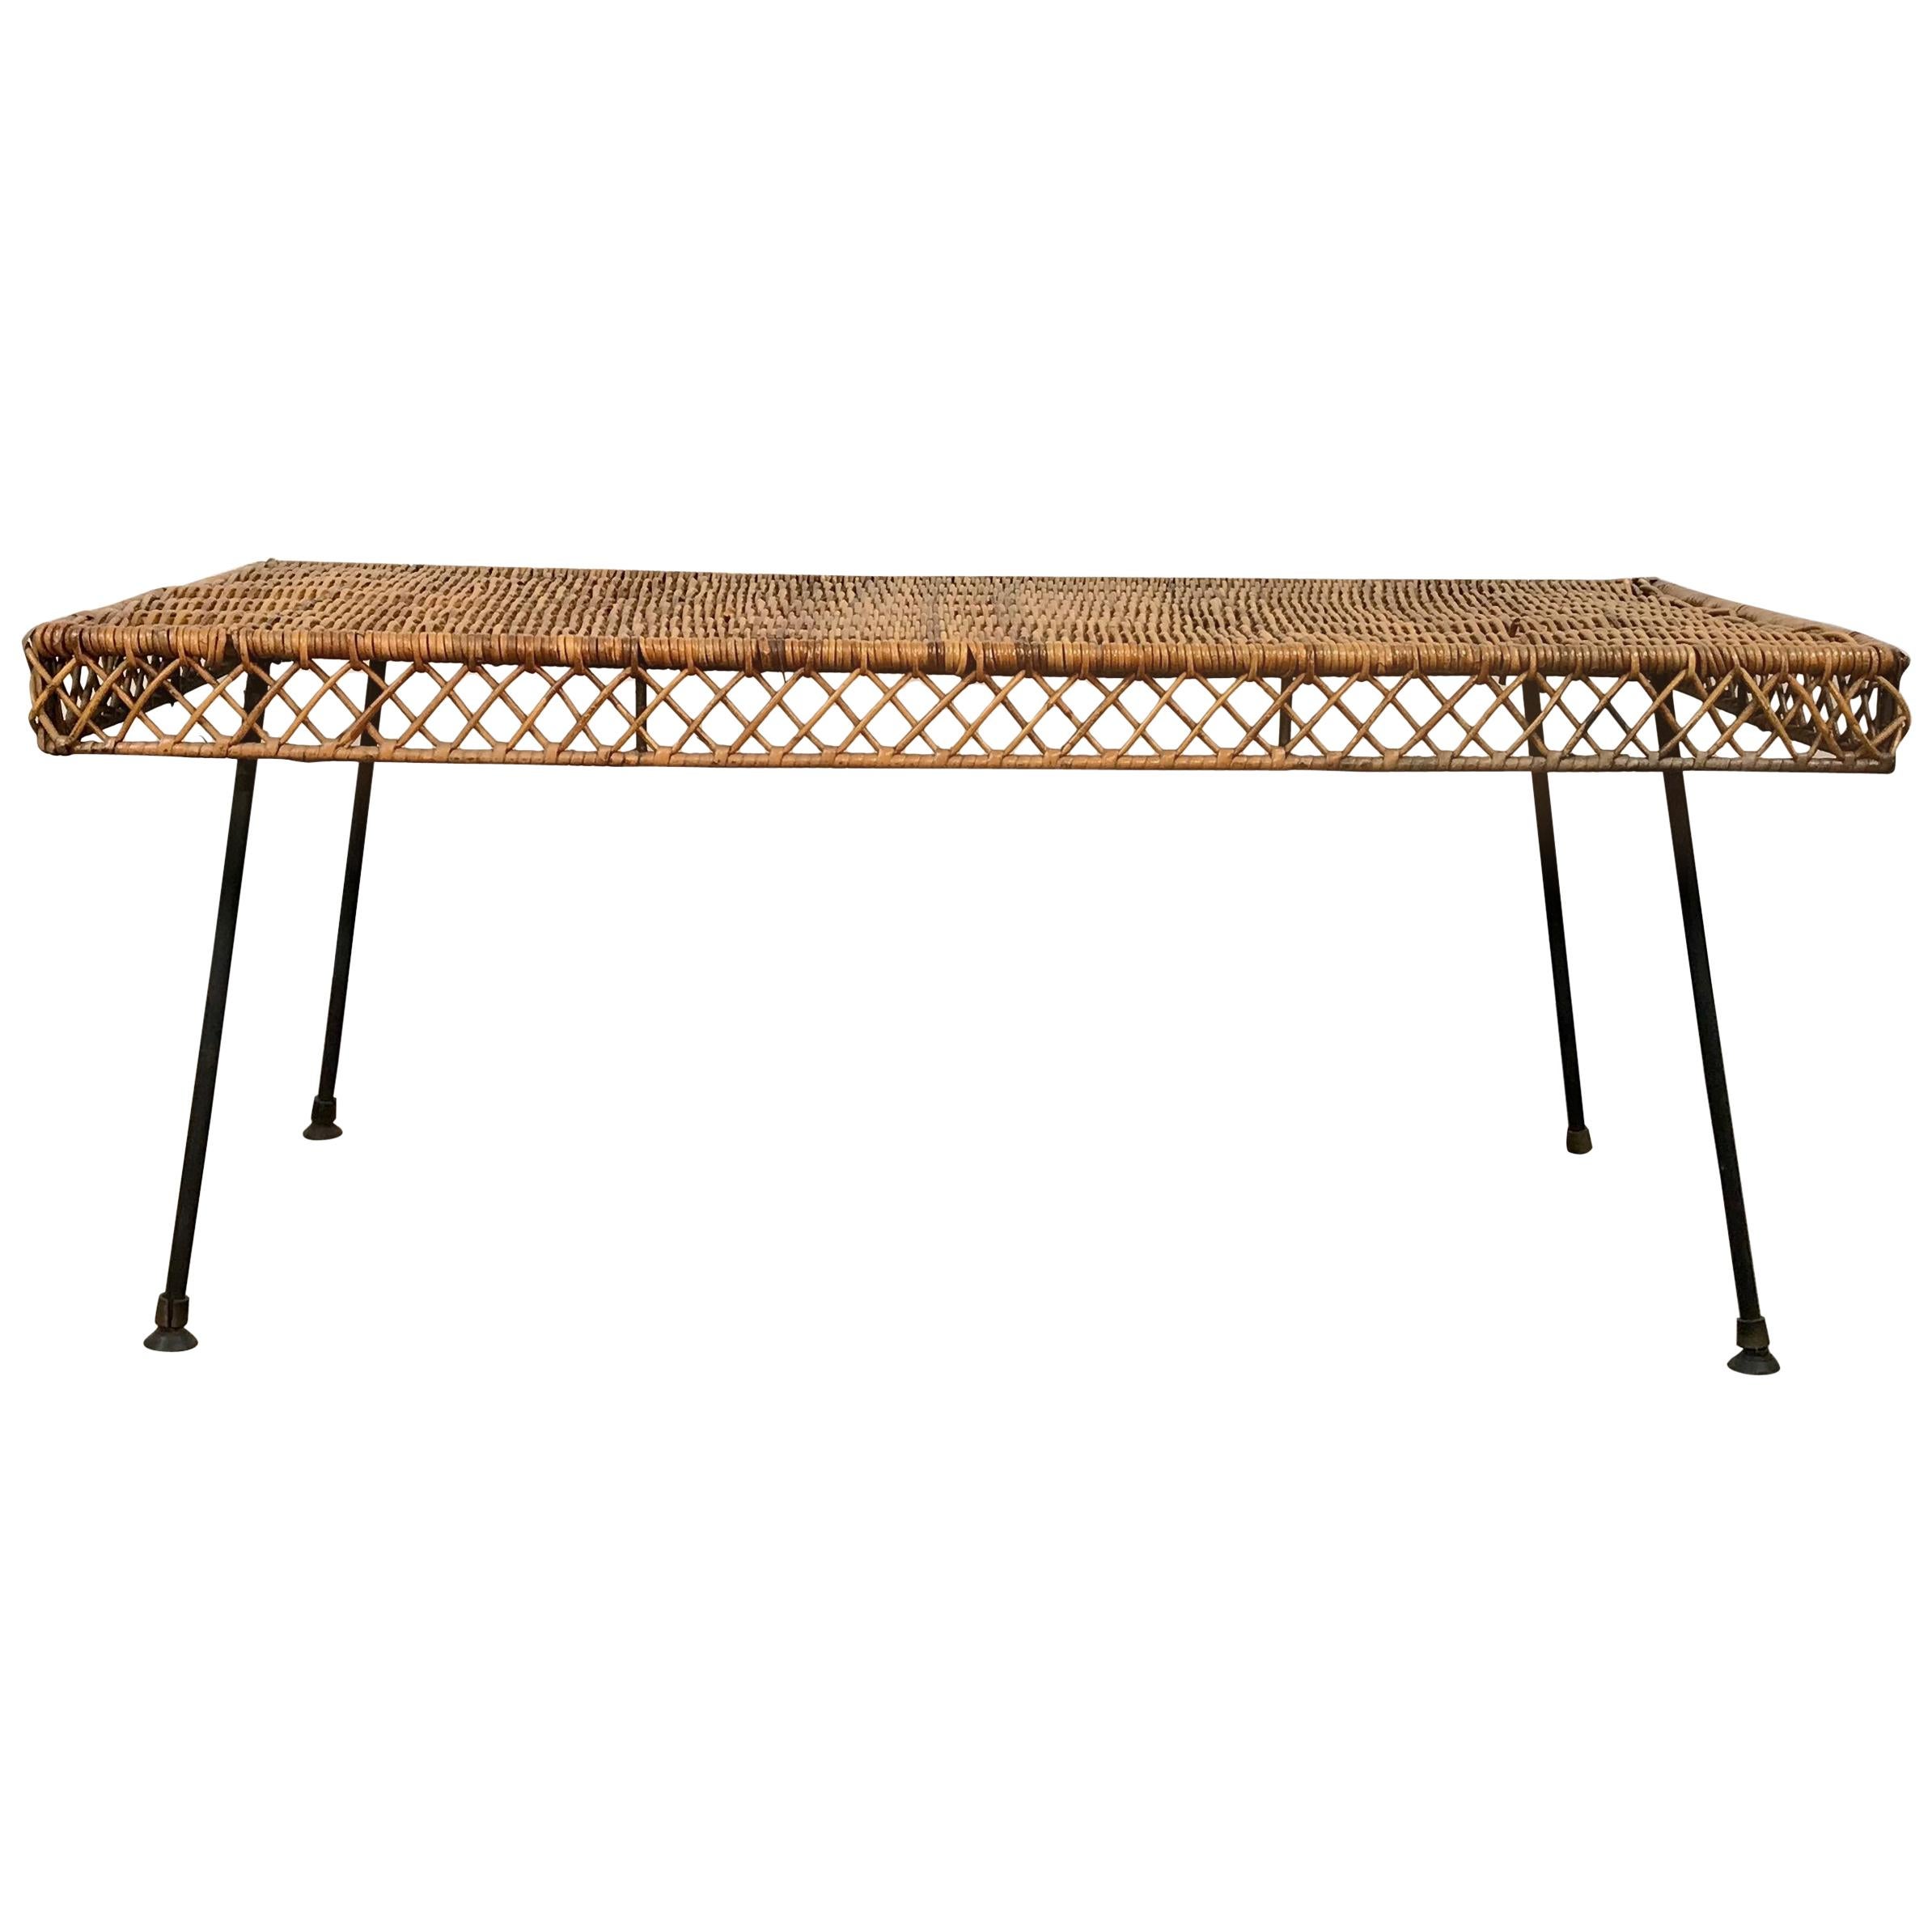 Classic Mid-Century Modern Wicker and Iron Cocktail Table by Danny Ho Fong For Sale